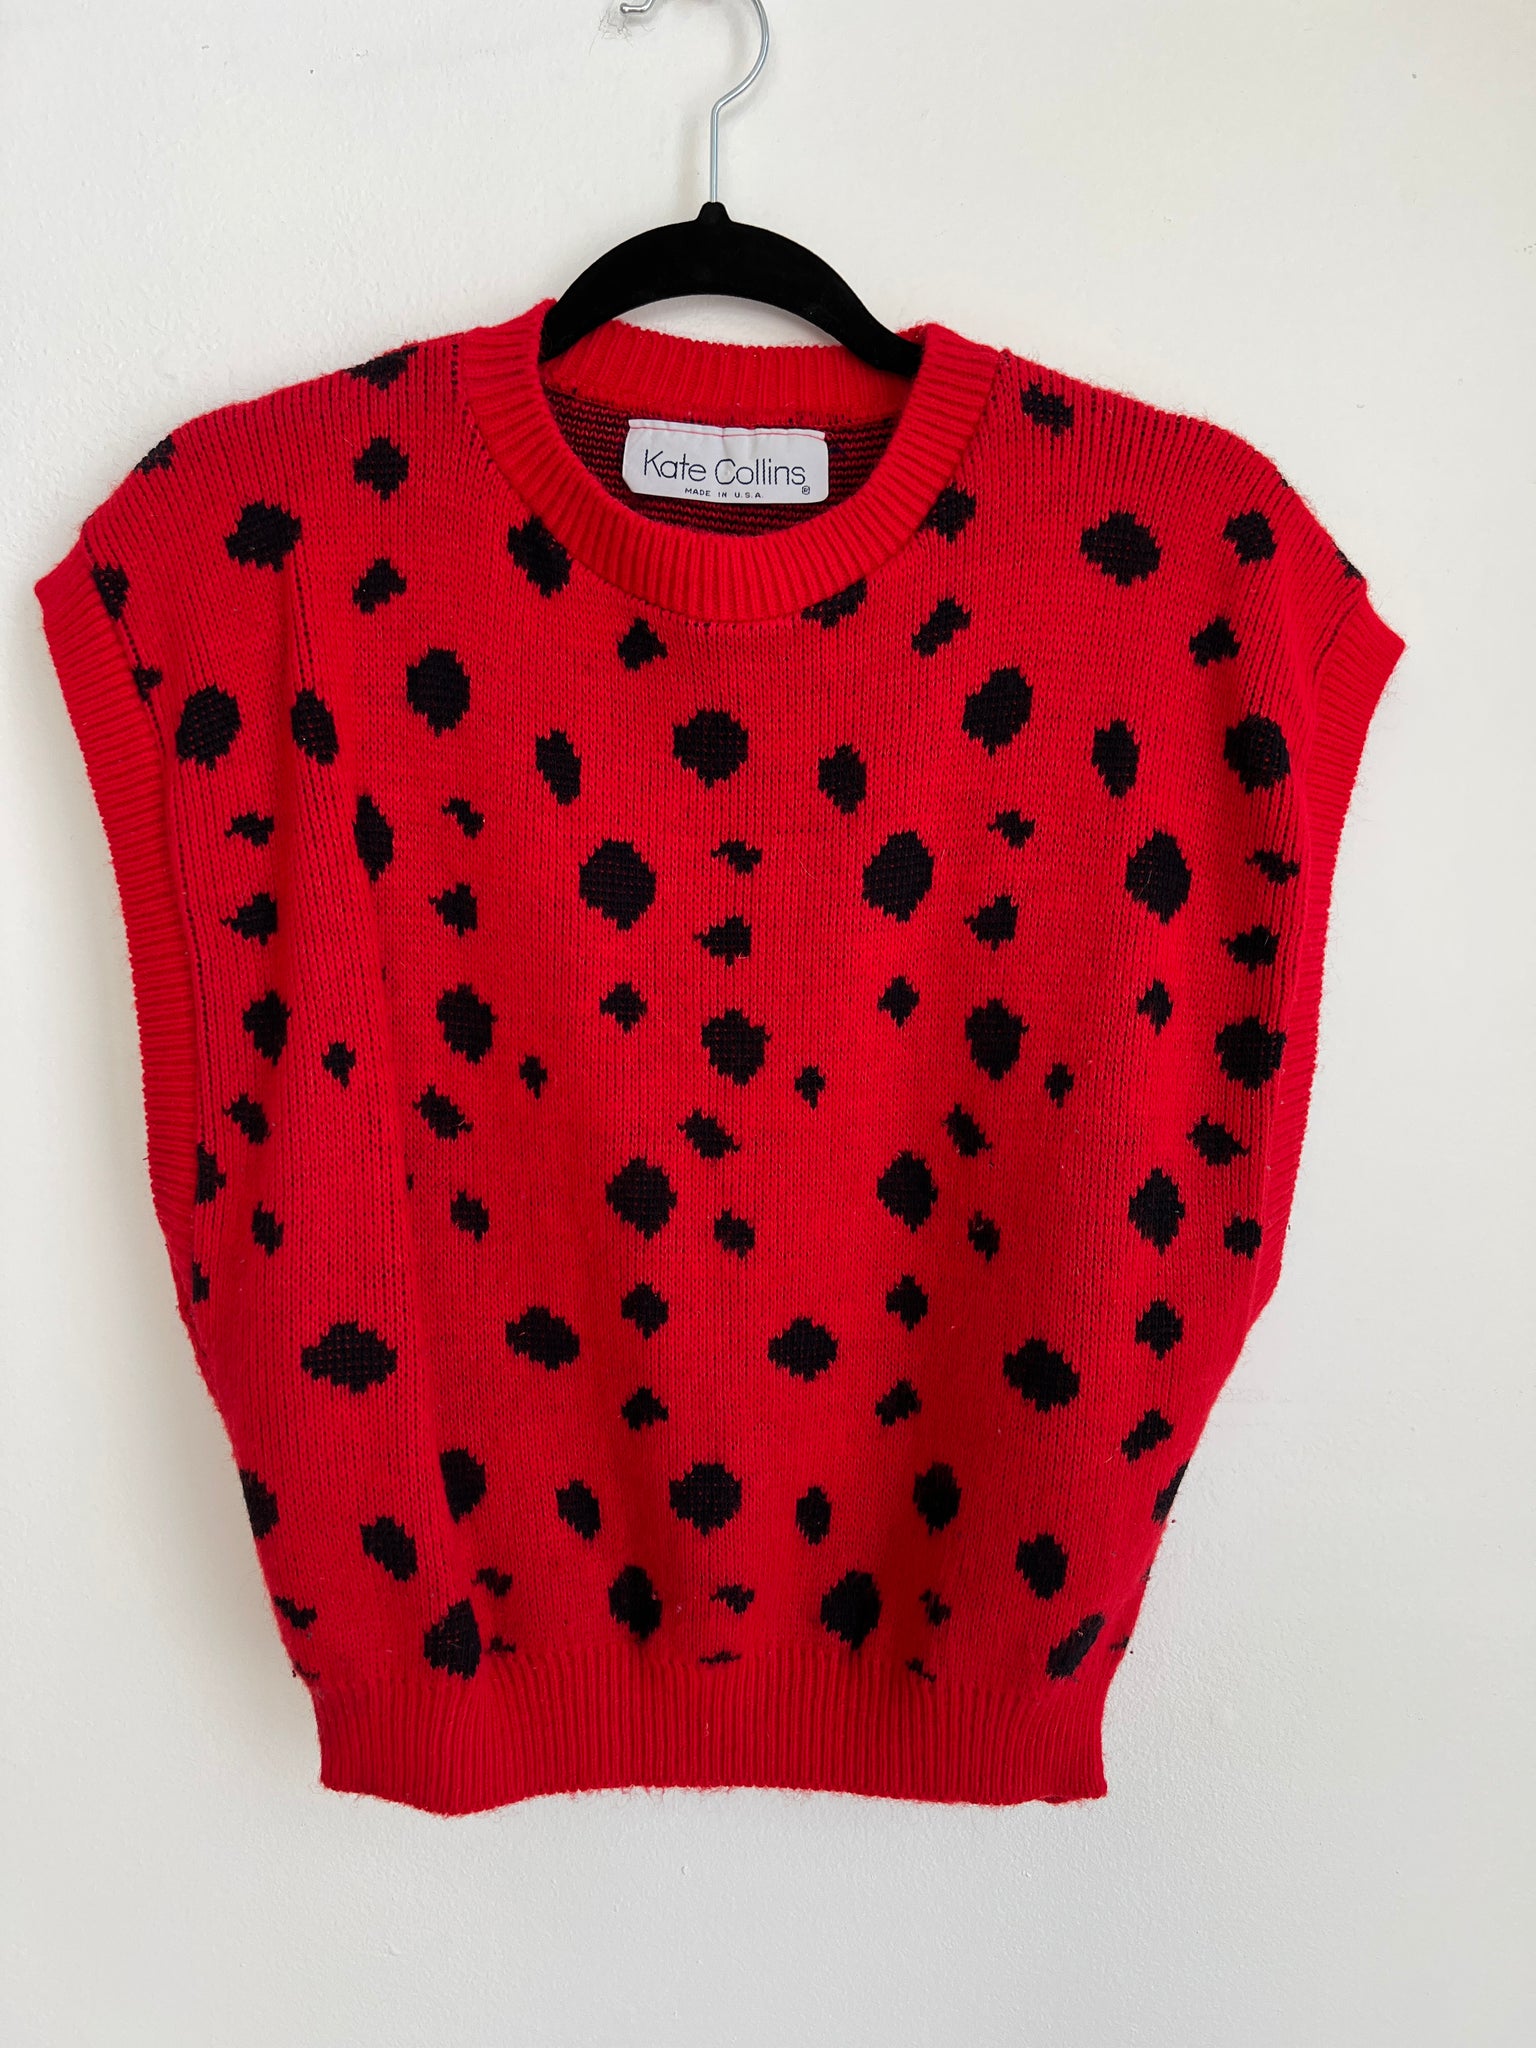 1980s SWEATER-VEST- Kate Collins red animal print